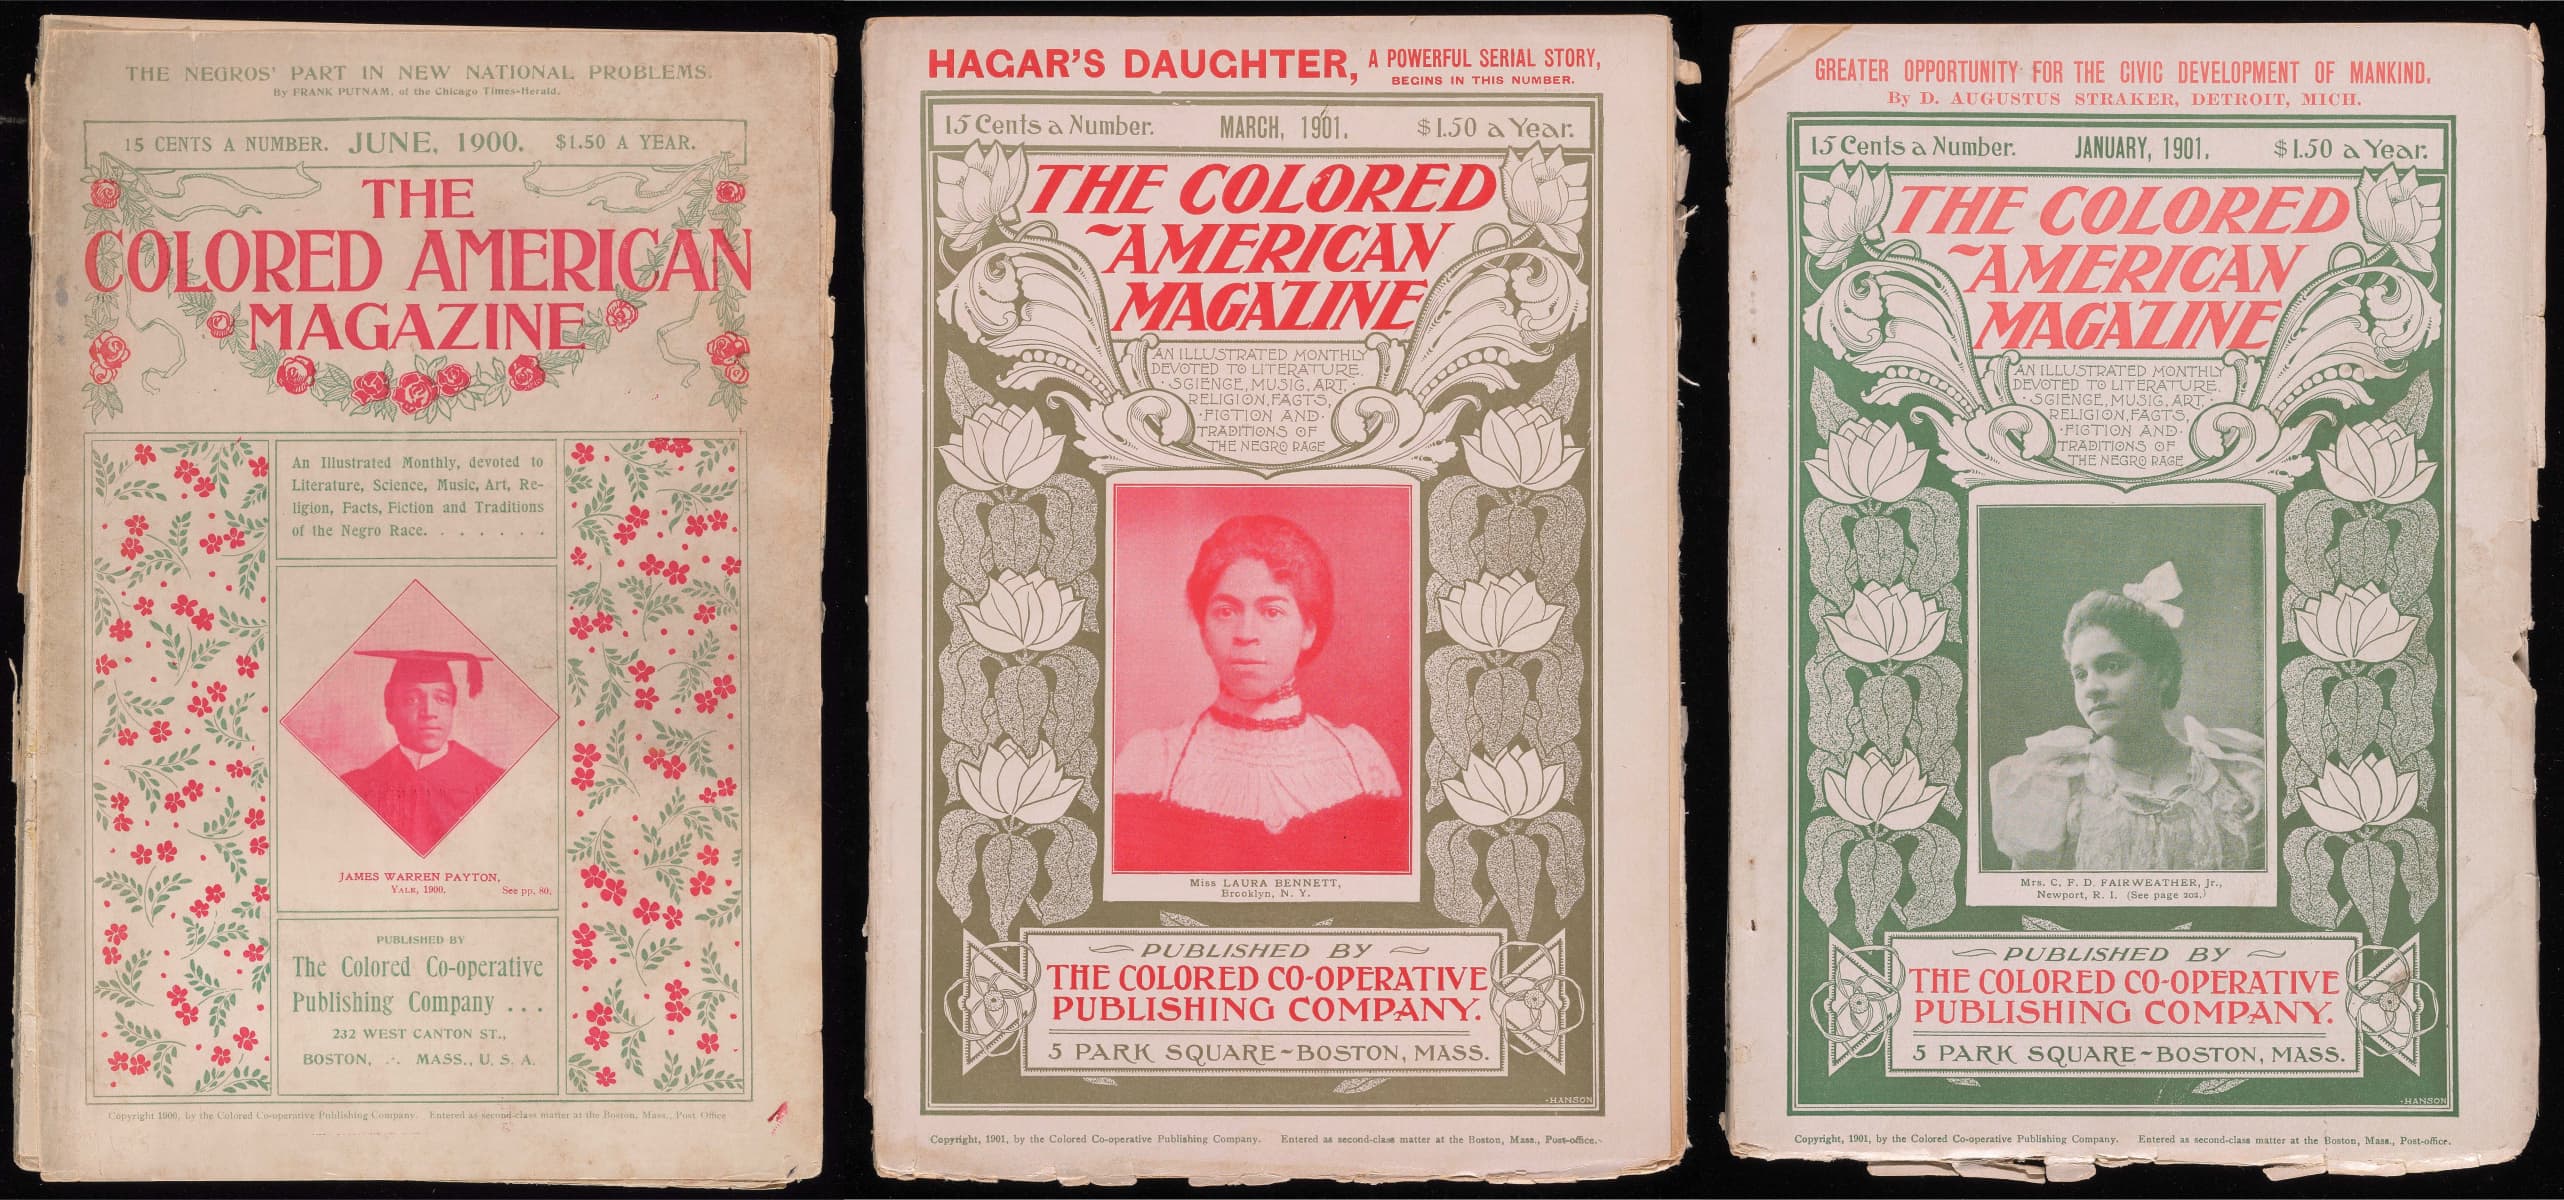 Covers of The Colored American Magazine, reproduced from The Digital Colored American Magazine, coloredamerican.org. Original held at the Beinecke Rare Book and Manuscript Library, Yale University.